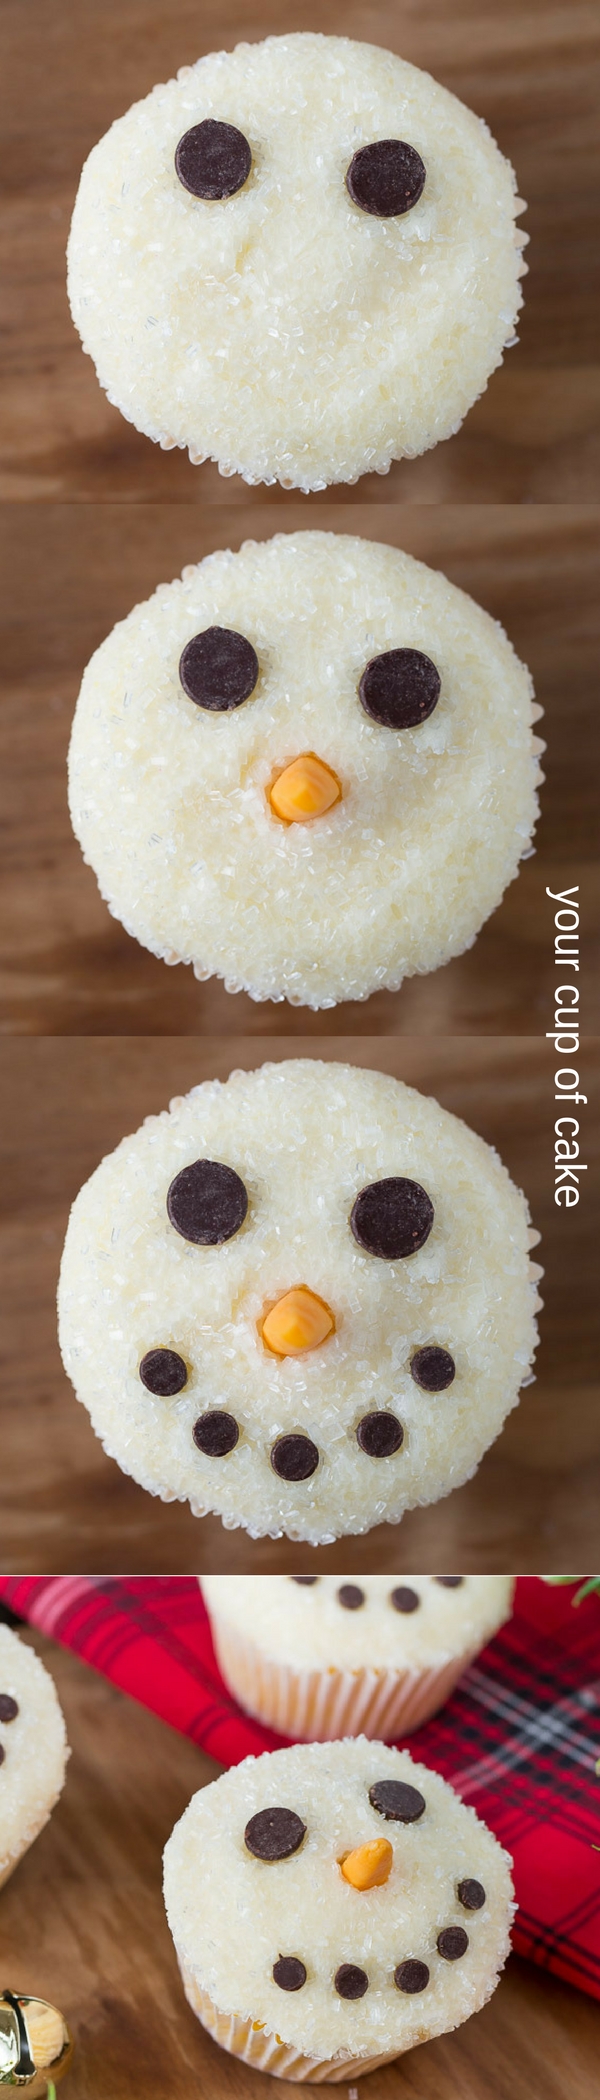 Easy to Make Snowman Cupcakes for Christmas, the kids will love helping you decorate these! 